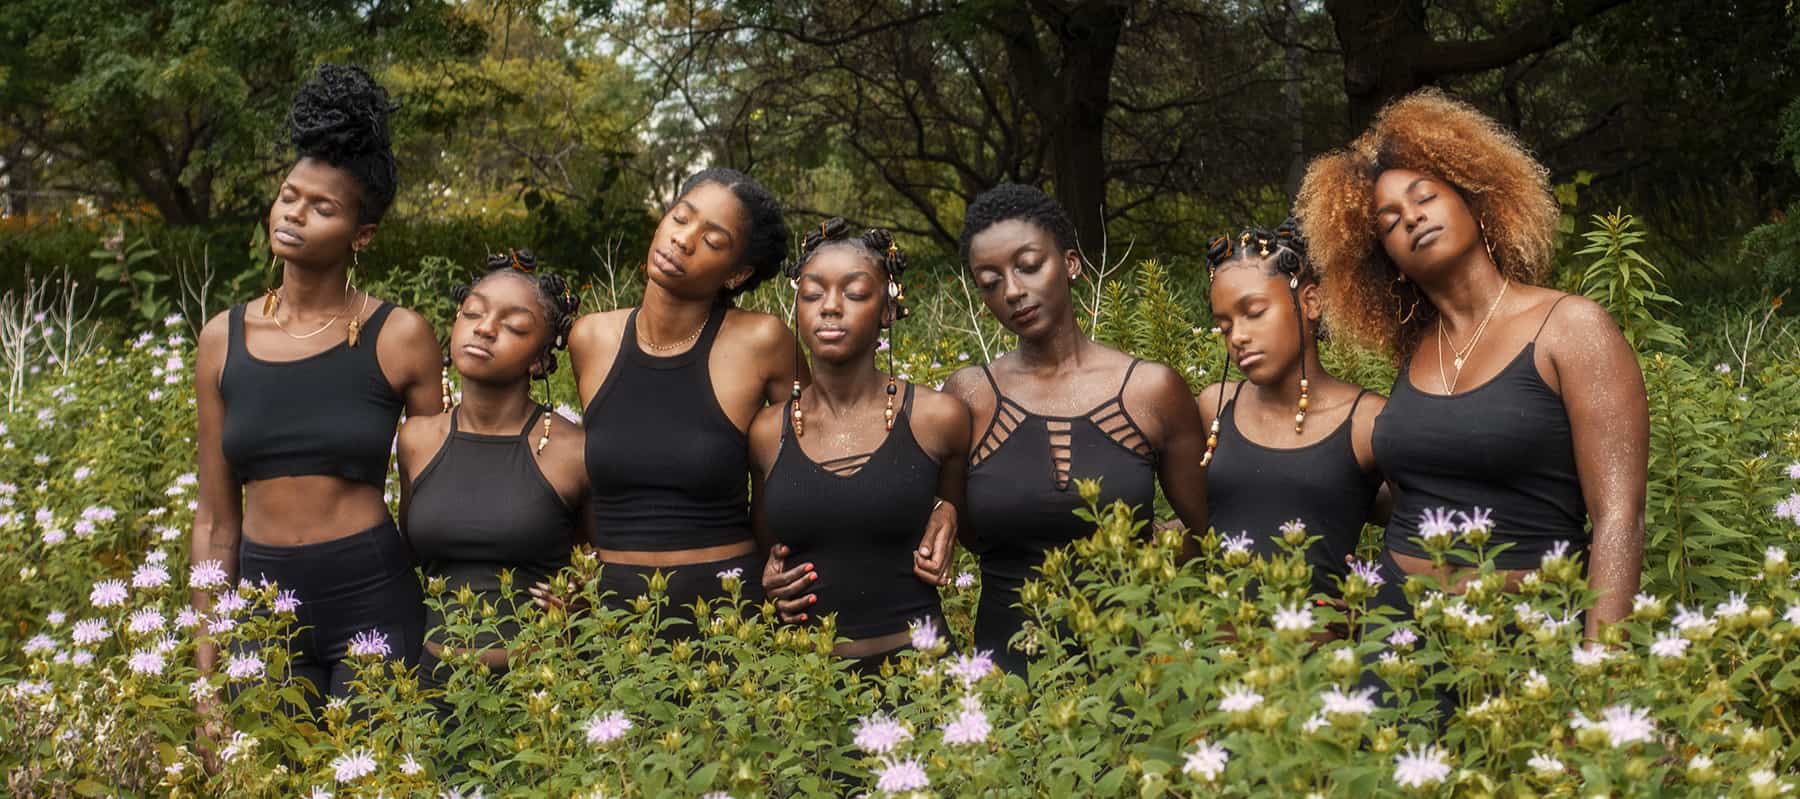 A group of seven Black women and girls stand in a field of flowers; all are dressed in black and have their eyes closed